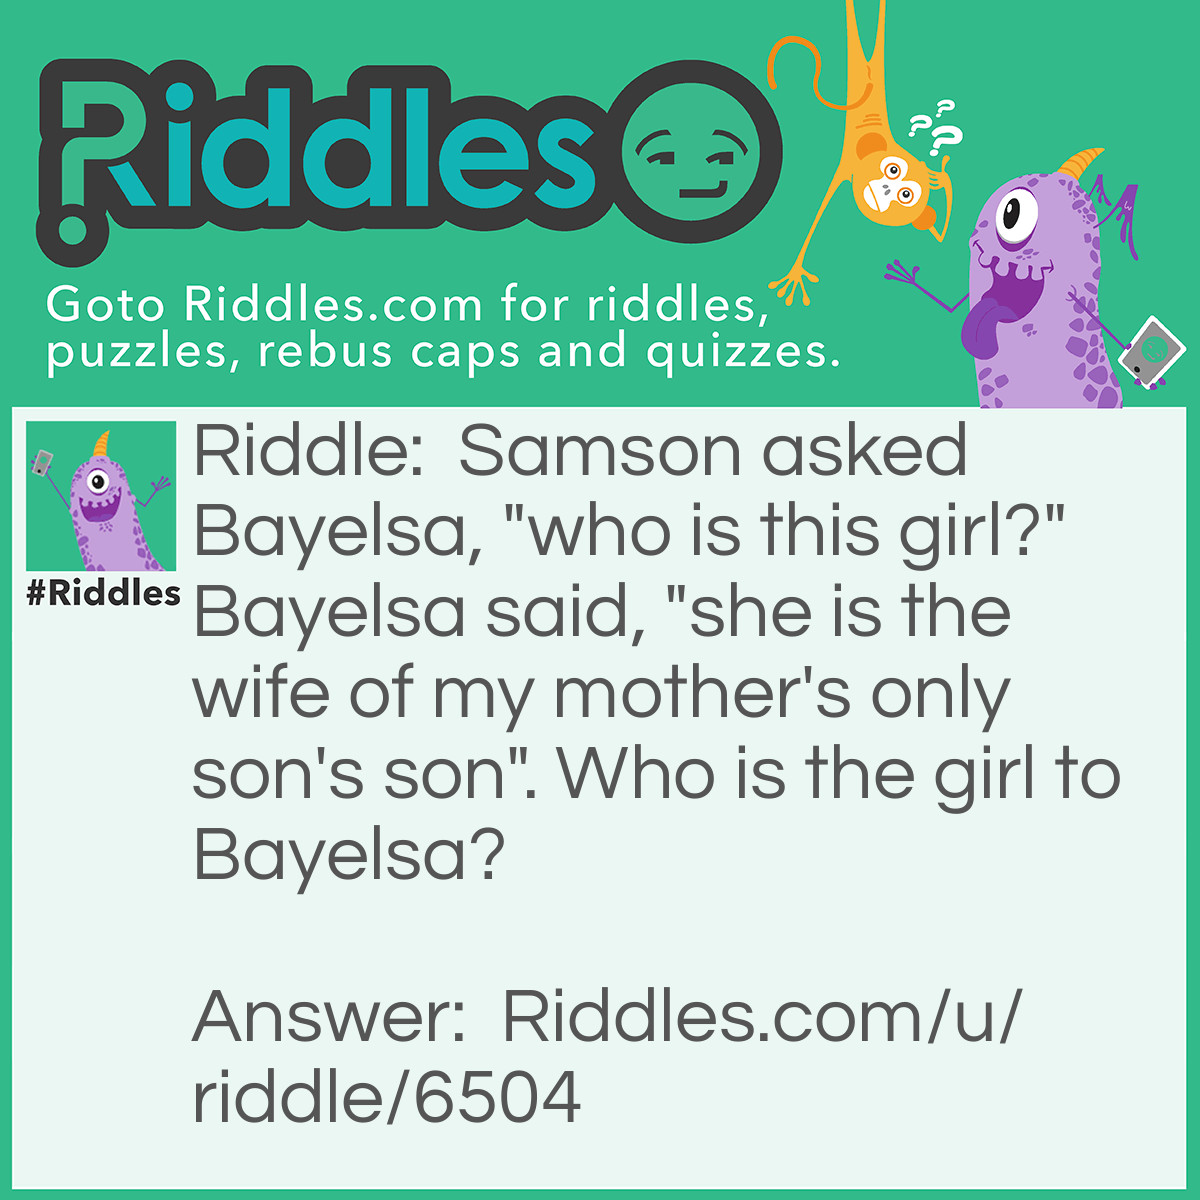 Riddle: Samson asked Bayelsa, "who is this girl?" Bayelsa said, "she is the wife of my mother's only son's son". Who is the girl to Bayelsa? Answer: His daughter in-law. Explanation: Mother's only son => means Bayelsa himself. Son's son => means his son. Wife of my mother's only son's son => means wife of his son. Therefore, she is his daughter in-law